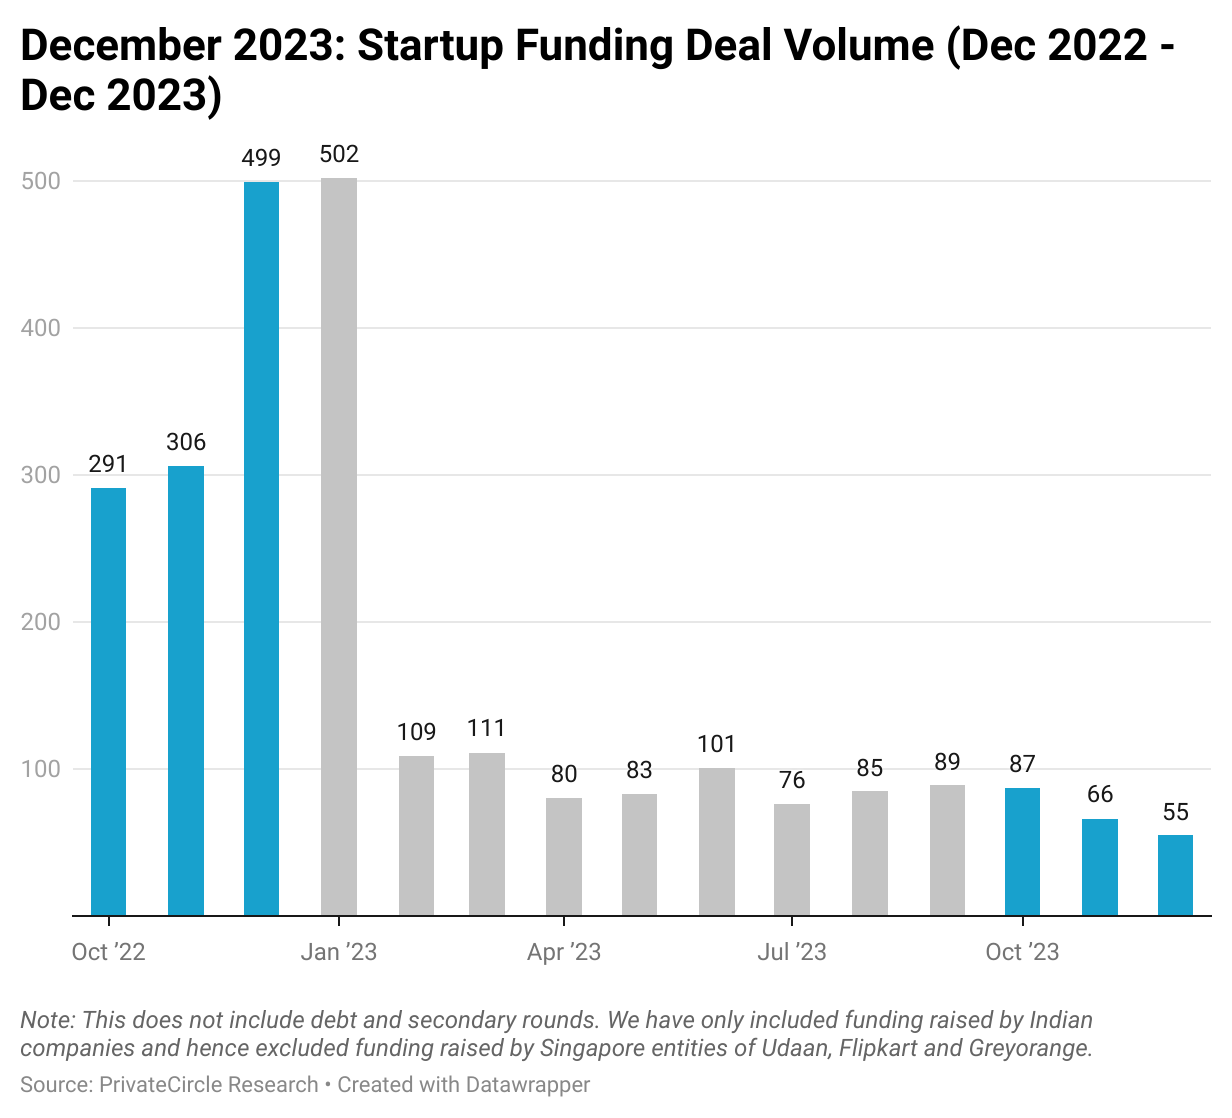 December 2023: Startup Funding Deal Volume (Dec 2022 - Dec 2023).

Funding deal volumes dropped to 55 deals in Dec 2023 as compared to 66 deals in Nov 2023. Further, the third quarter in FY 2022 saw 208 deals which is 80% less than the 1096 deals recorded in Q3 FY2022.
